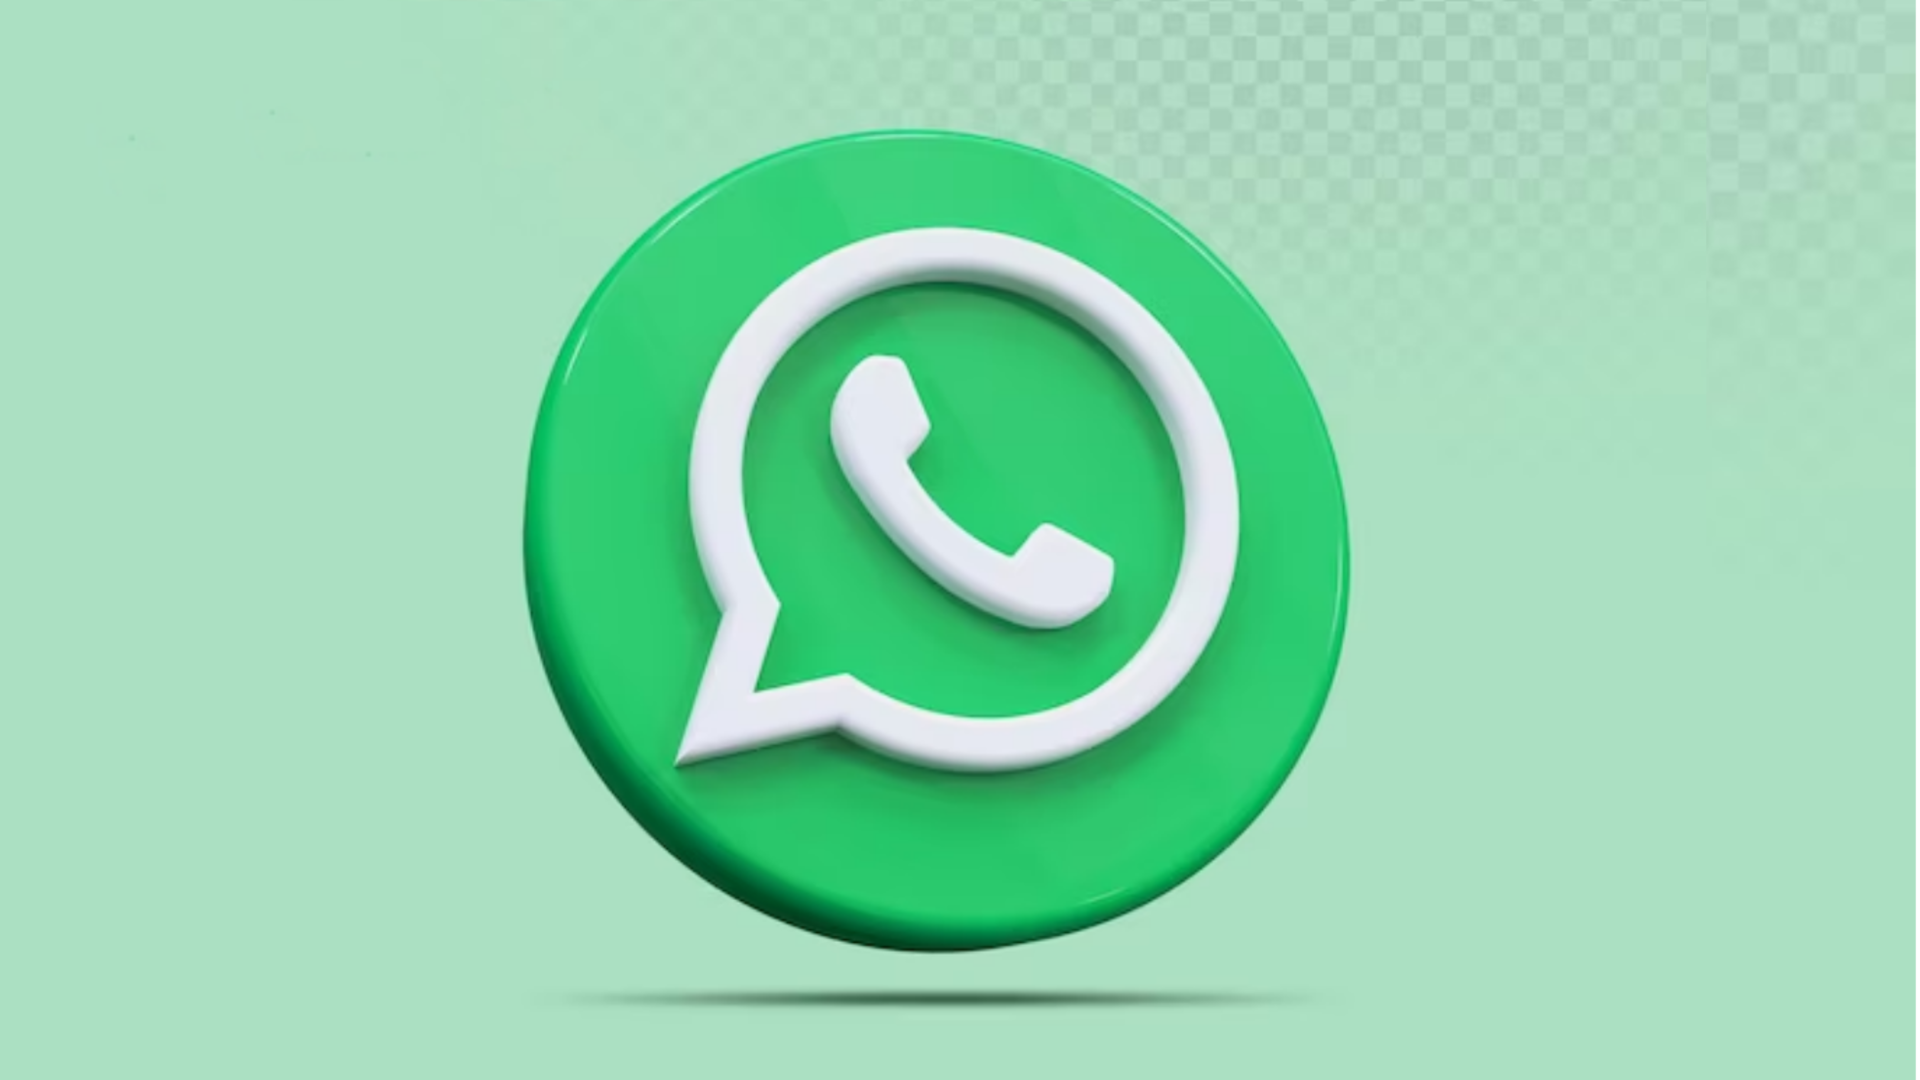 WhatsApp introduces screen-sharing feature for video calls for Windows users